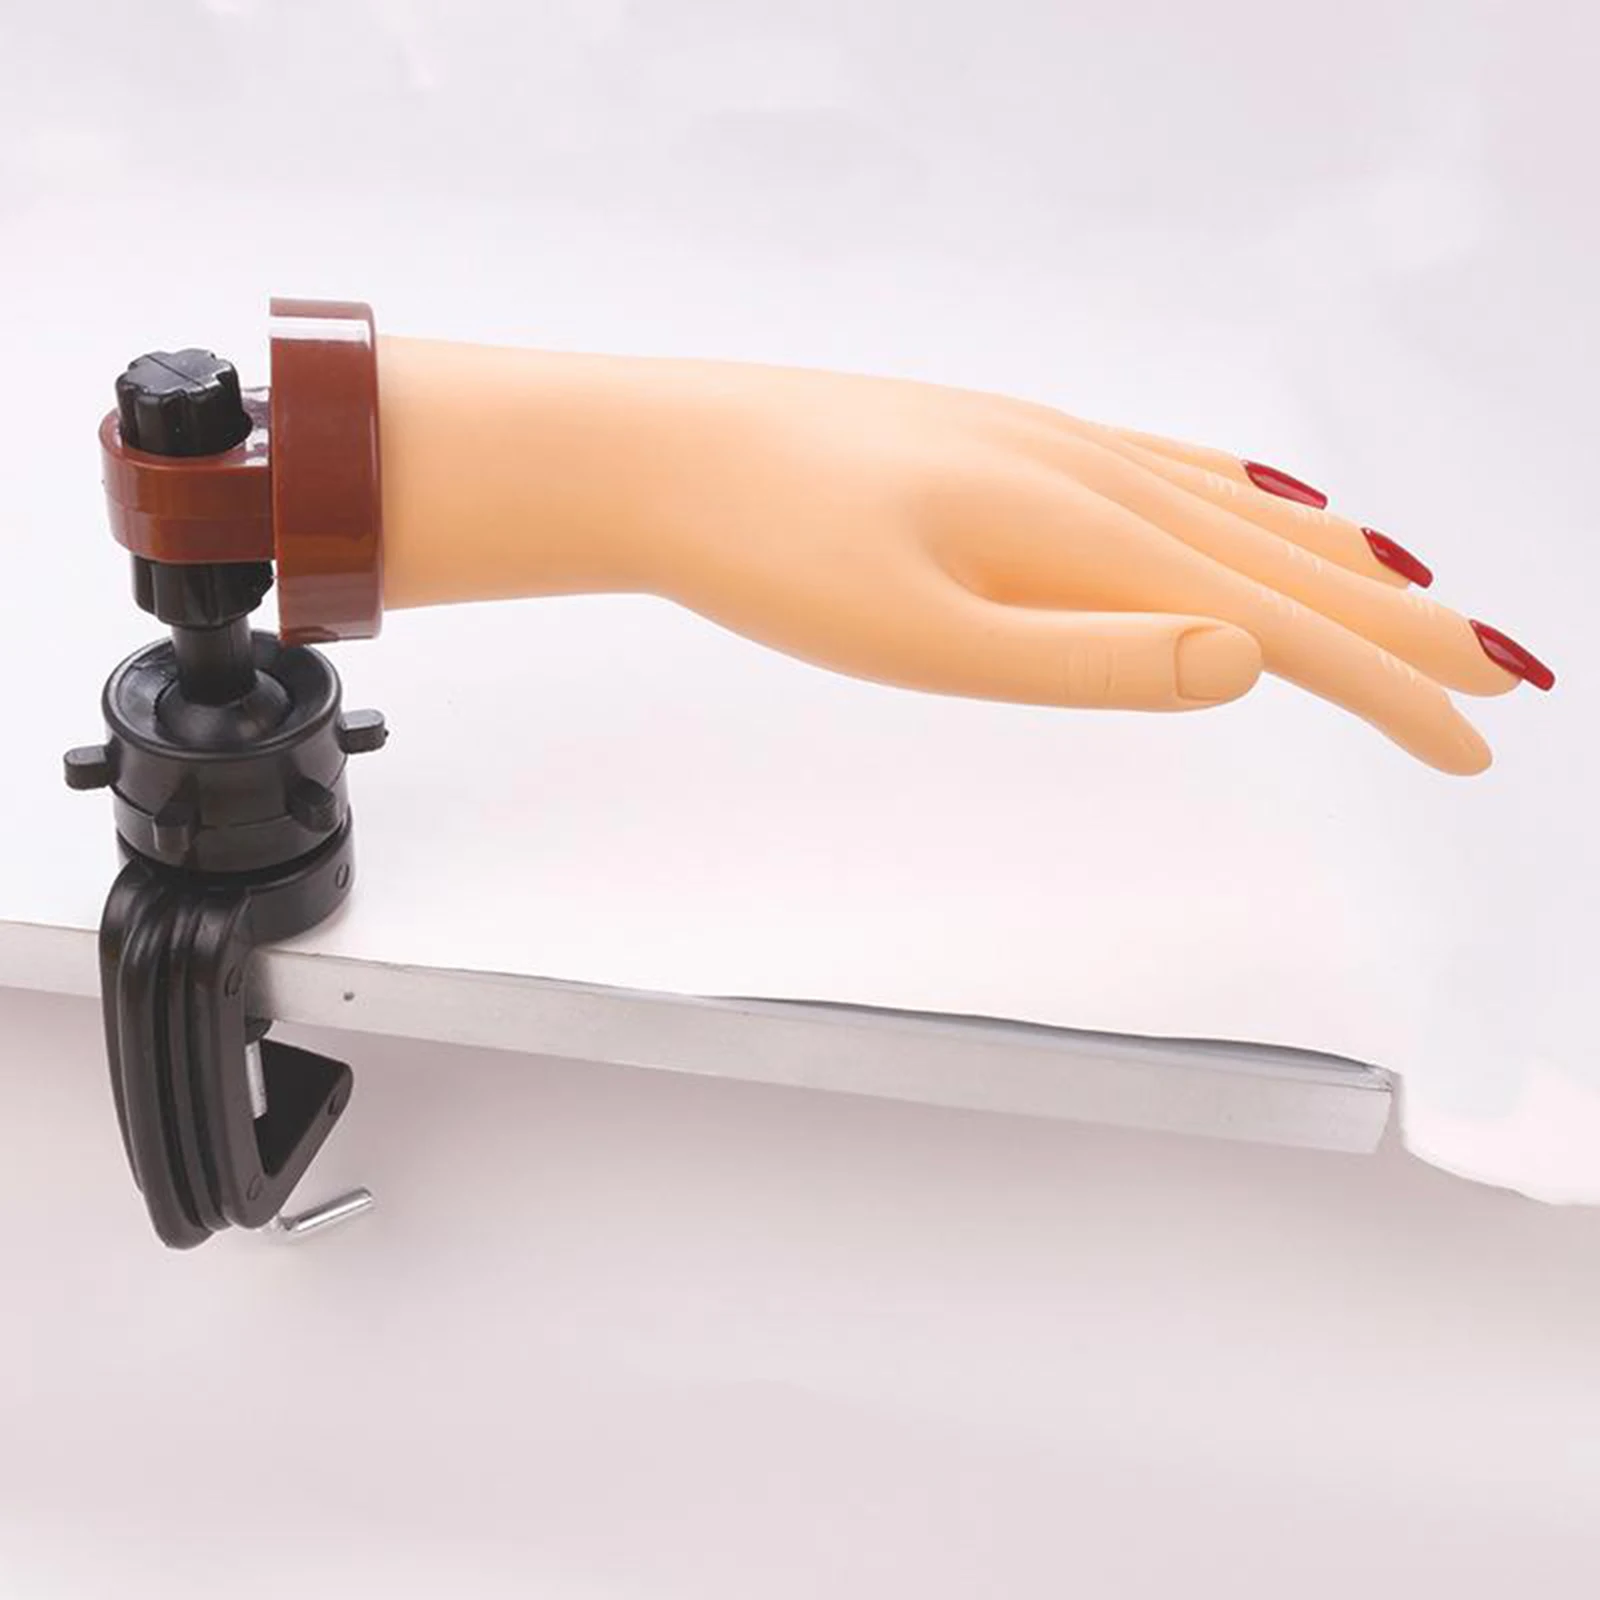 Left Silicone Nail Trainning Practice Hands DIY Print Nail Art Training Display Manicure Mannequin Model Fake Hands